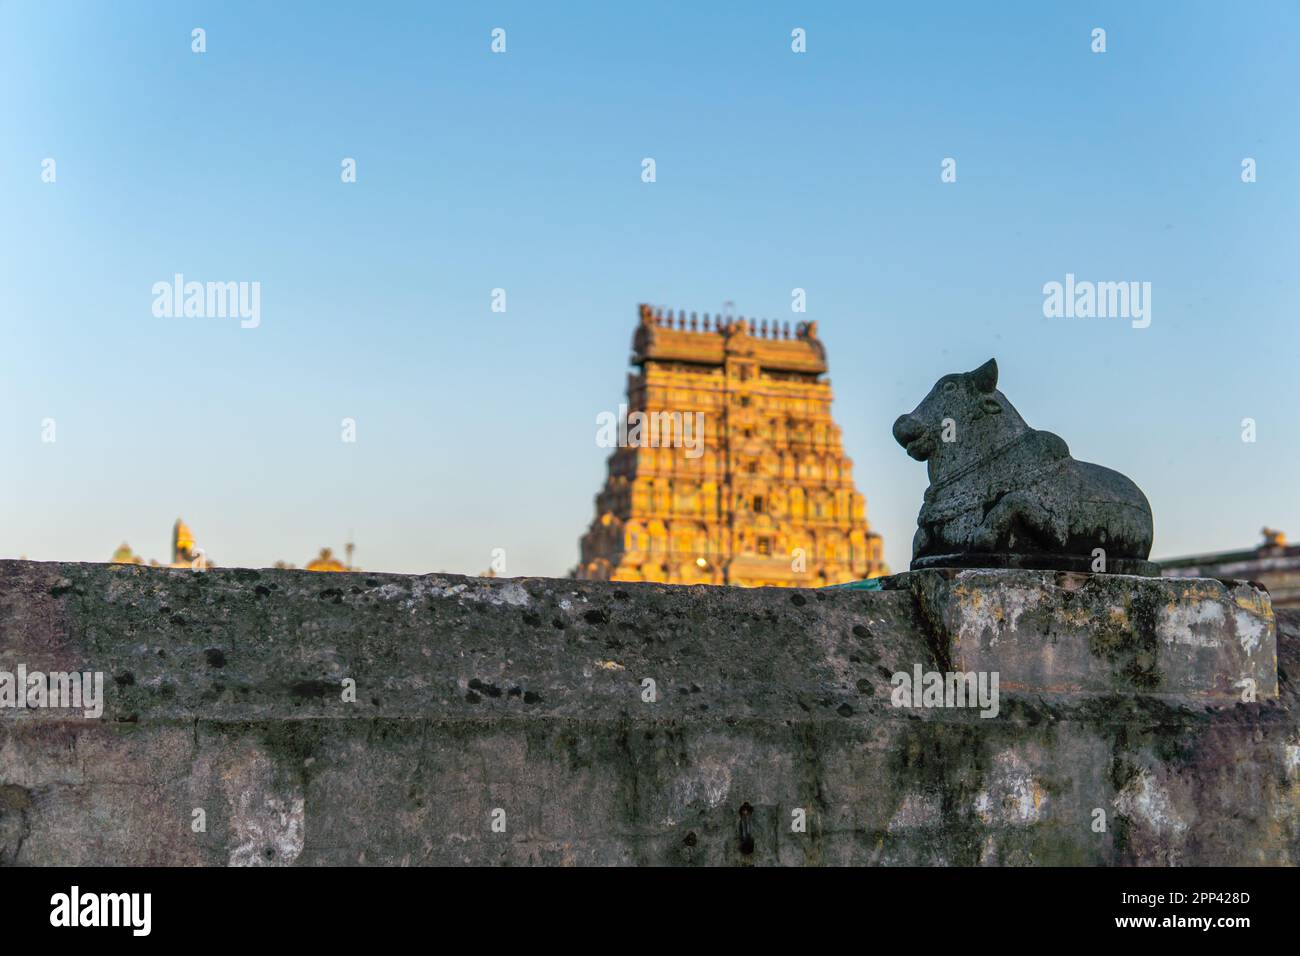 Ancient south Indian temple in Chidambaram with Nandhi facing the Shiva gopuram. Gopuram of a temple in the distance illuminated with golden colour Stock Photo